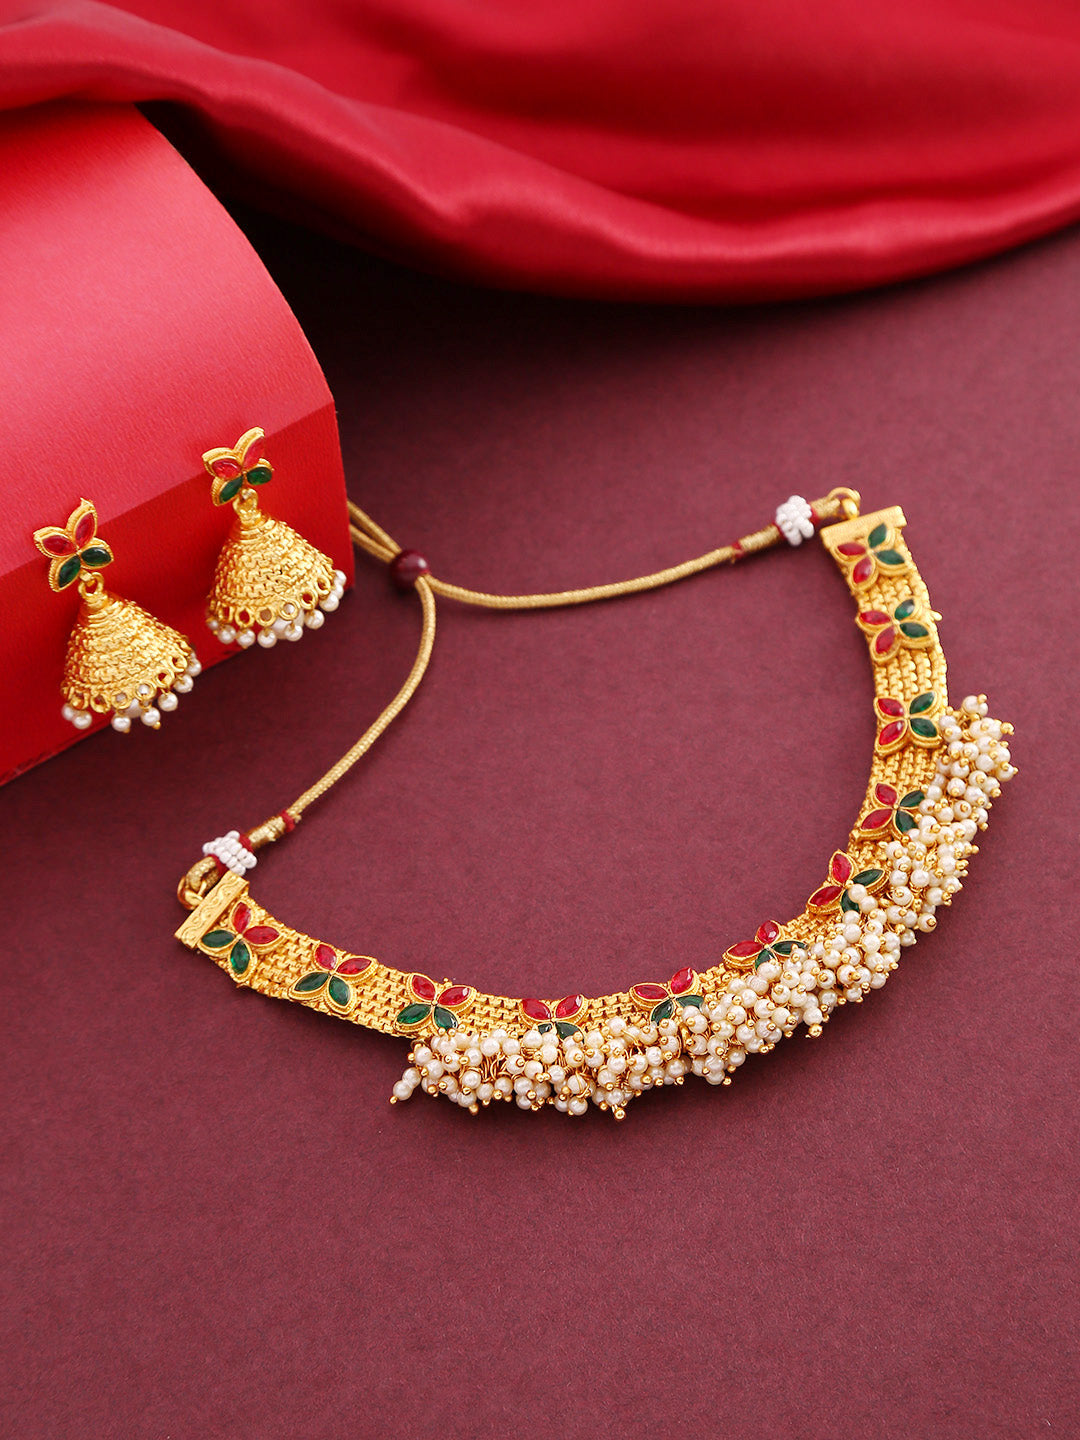 White Beads Ruby Emerlad Gold Plated Jewellery Set